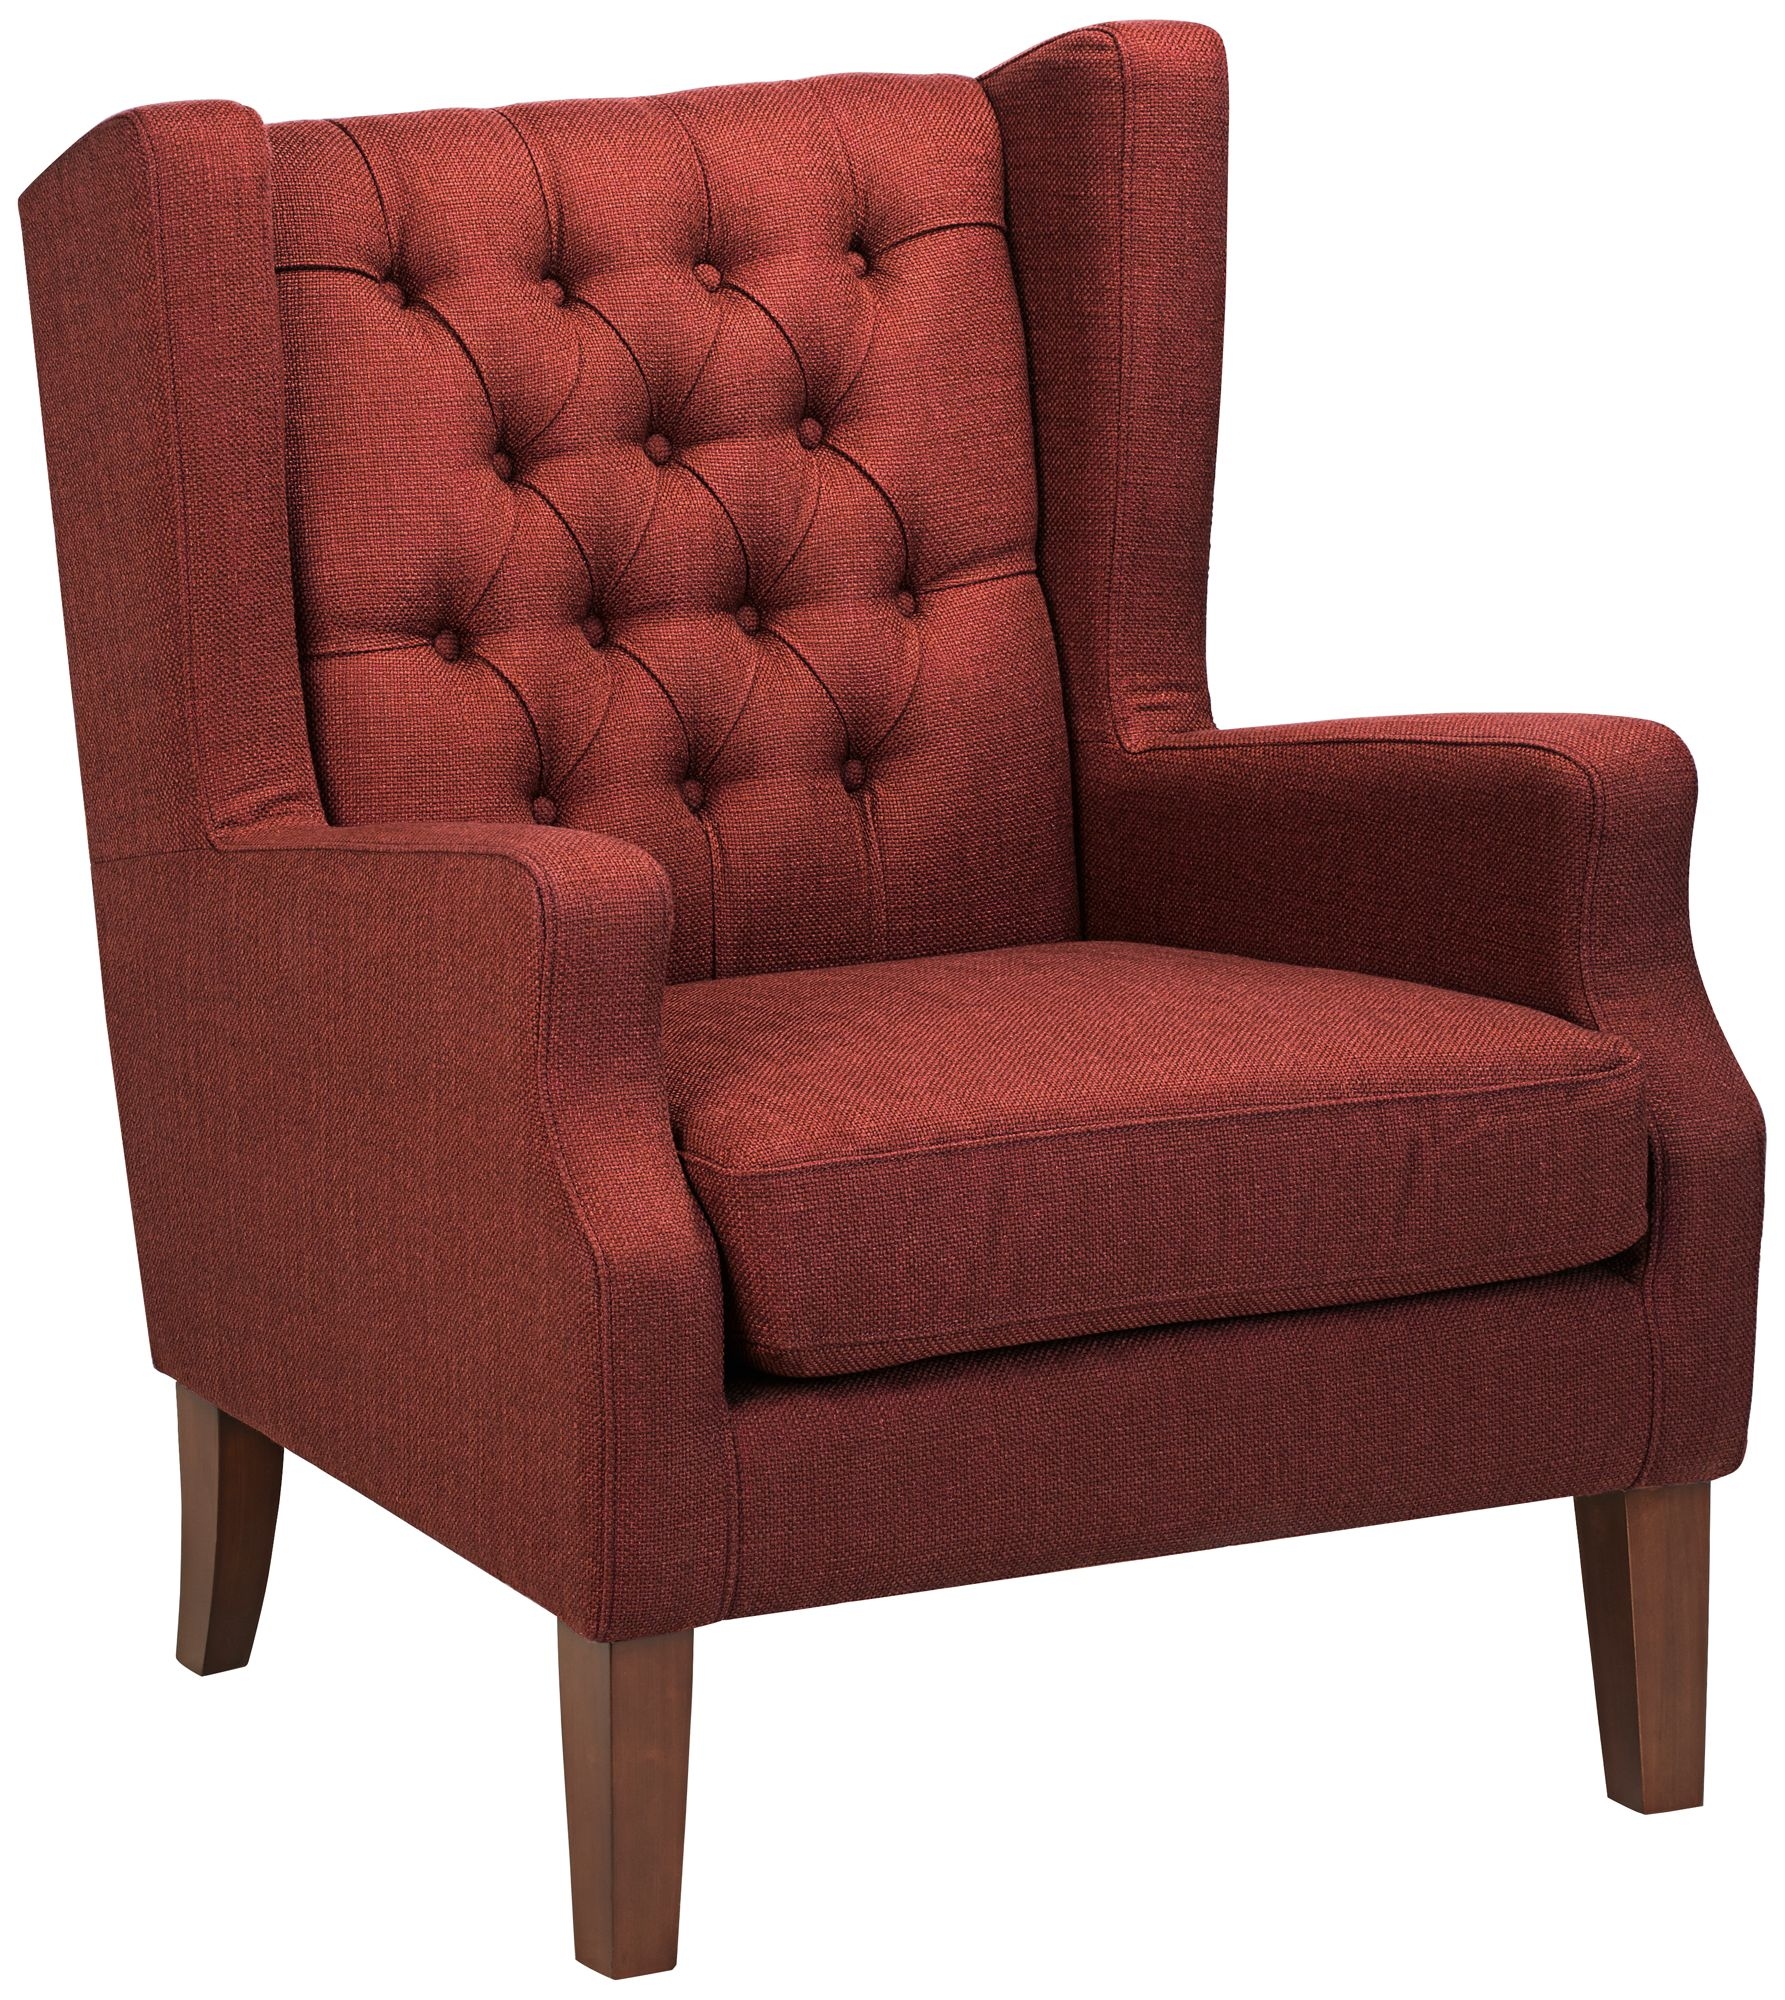 Maxwell Lillian Tufted Russet Red Armchair - Image 0